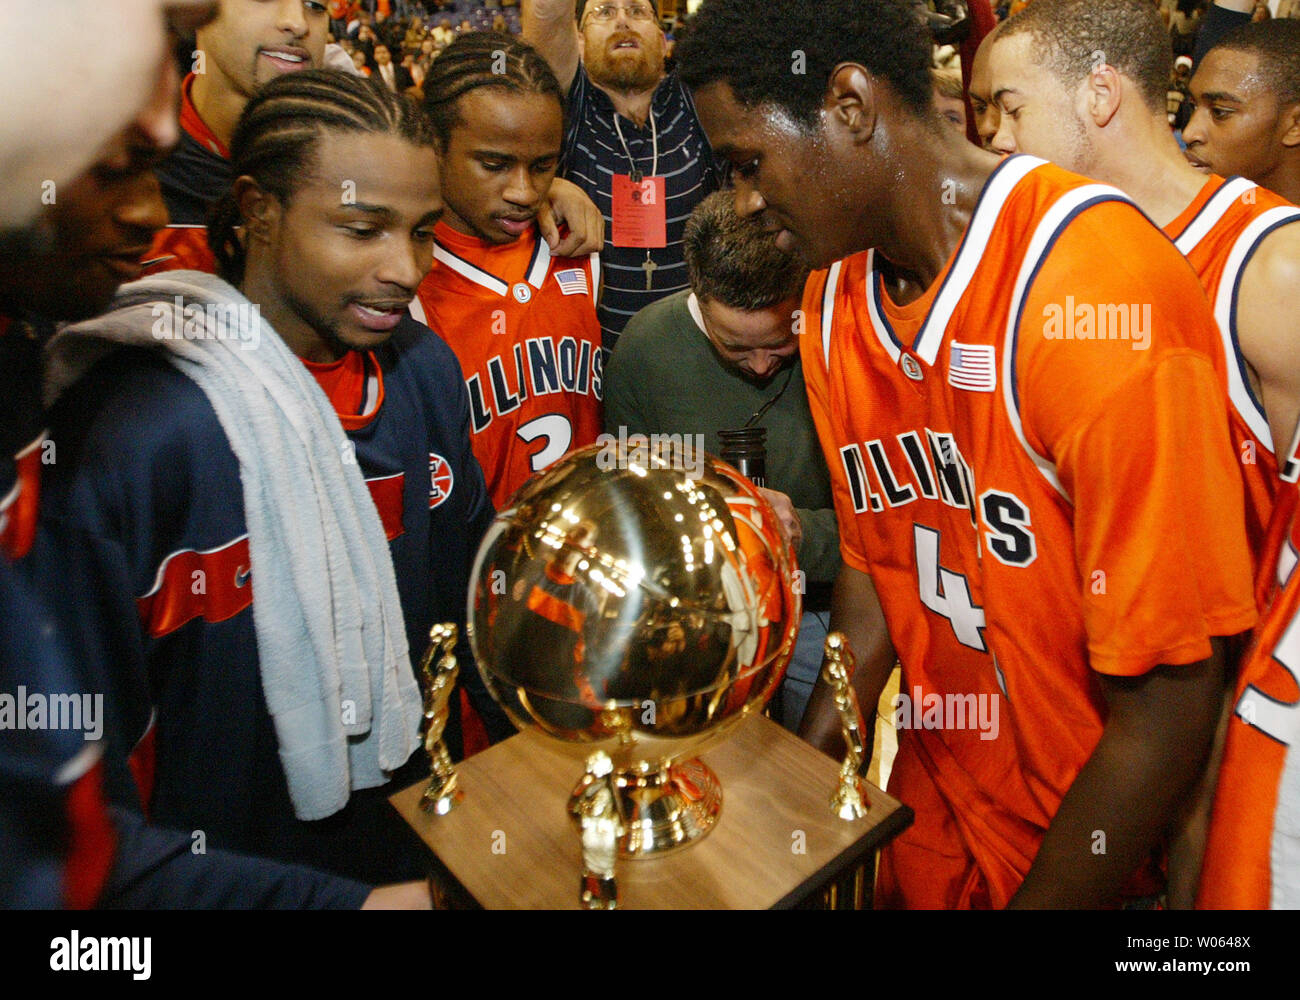 University of Illinois' Dee Brown (L) Chester Frazier (3) Warren Carter (R) and the rest of the Fighting Illini prepare to hoist the winning trophy after defeating Missouri 82-50 in the Annual Busch Braggin' Rights Game at the Savvis Center in St. Louis on December 21, 2005. (UPI Photo/Bill Greenblatt) Stock Photo